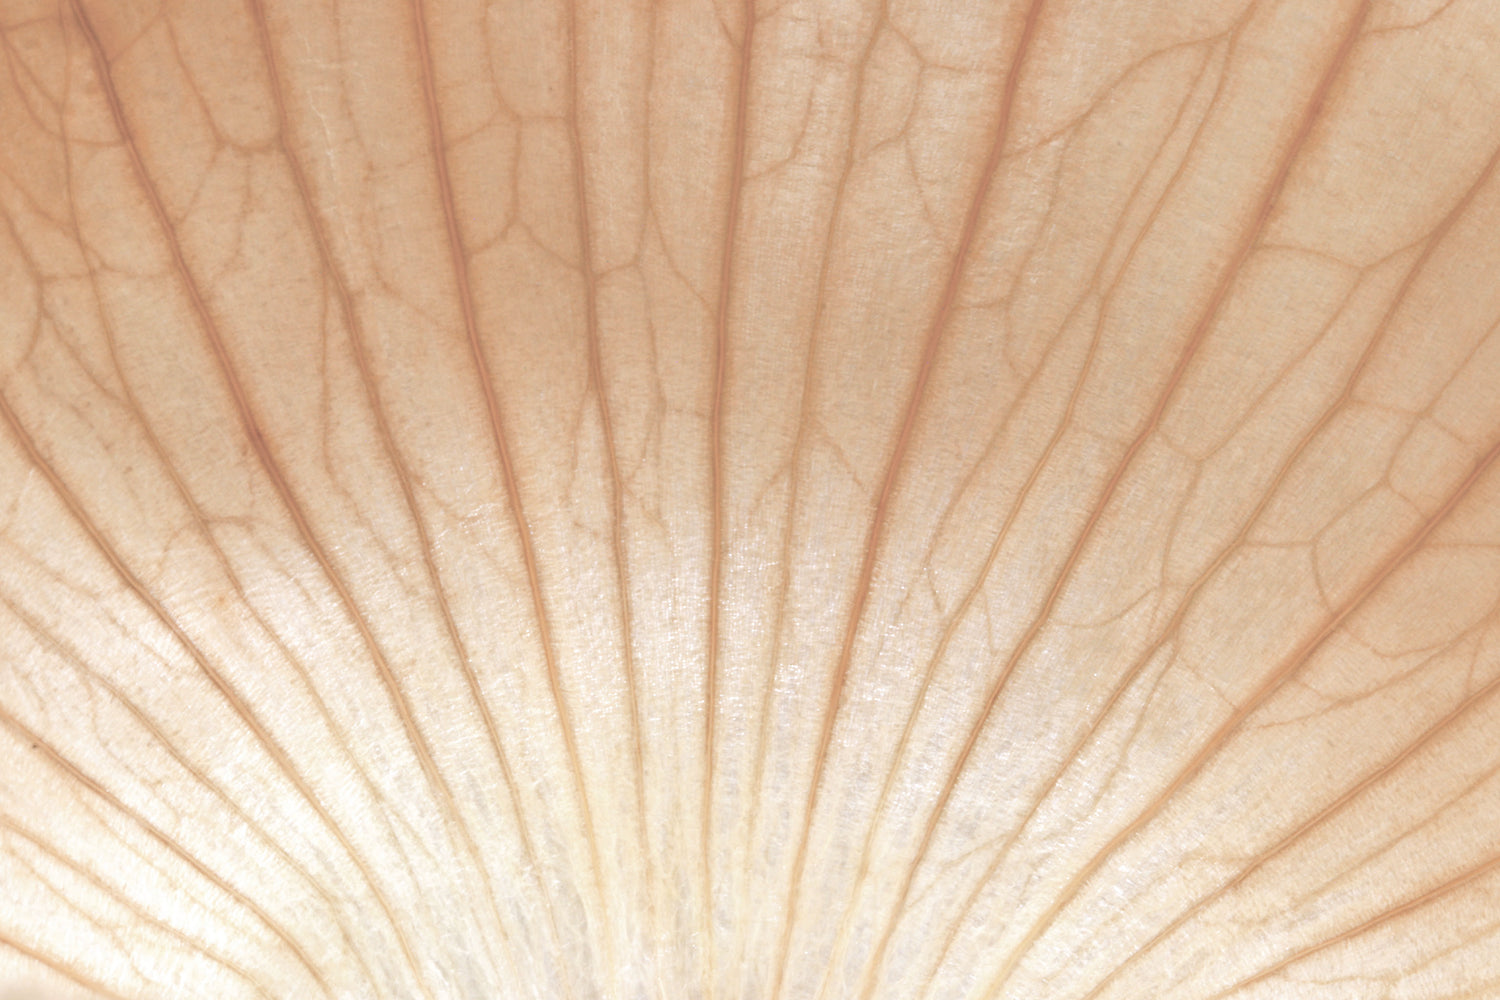 Background close-up image of a plant cell showing dark brown veins on a pale pinkish-brown background.